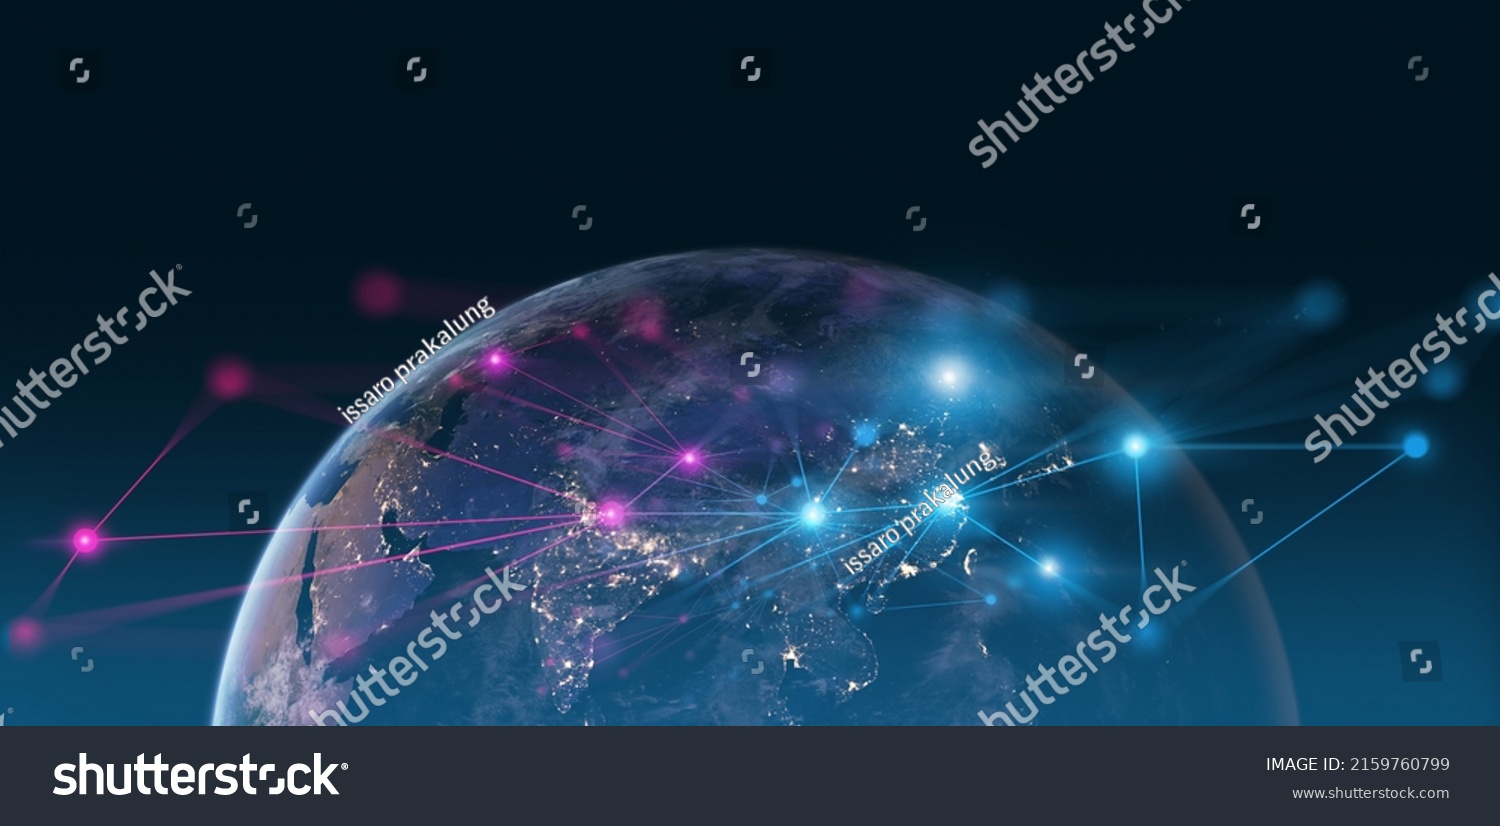 earth and network of internet satellite for telecom,globe data cloud storage of 5g, global networking of social data communication ,Elements of this image furnished by NASA #2159760799